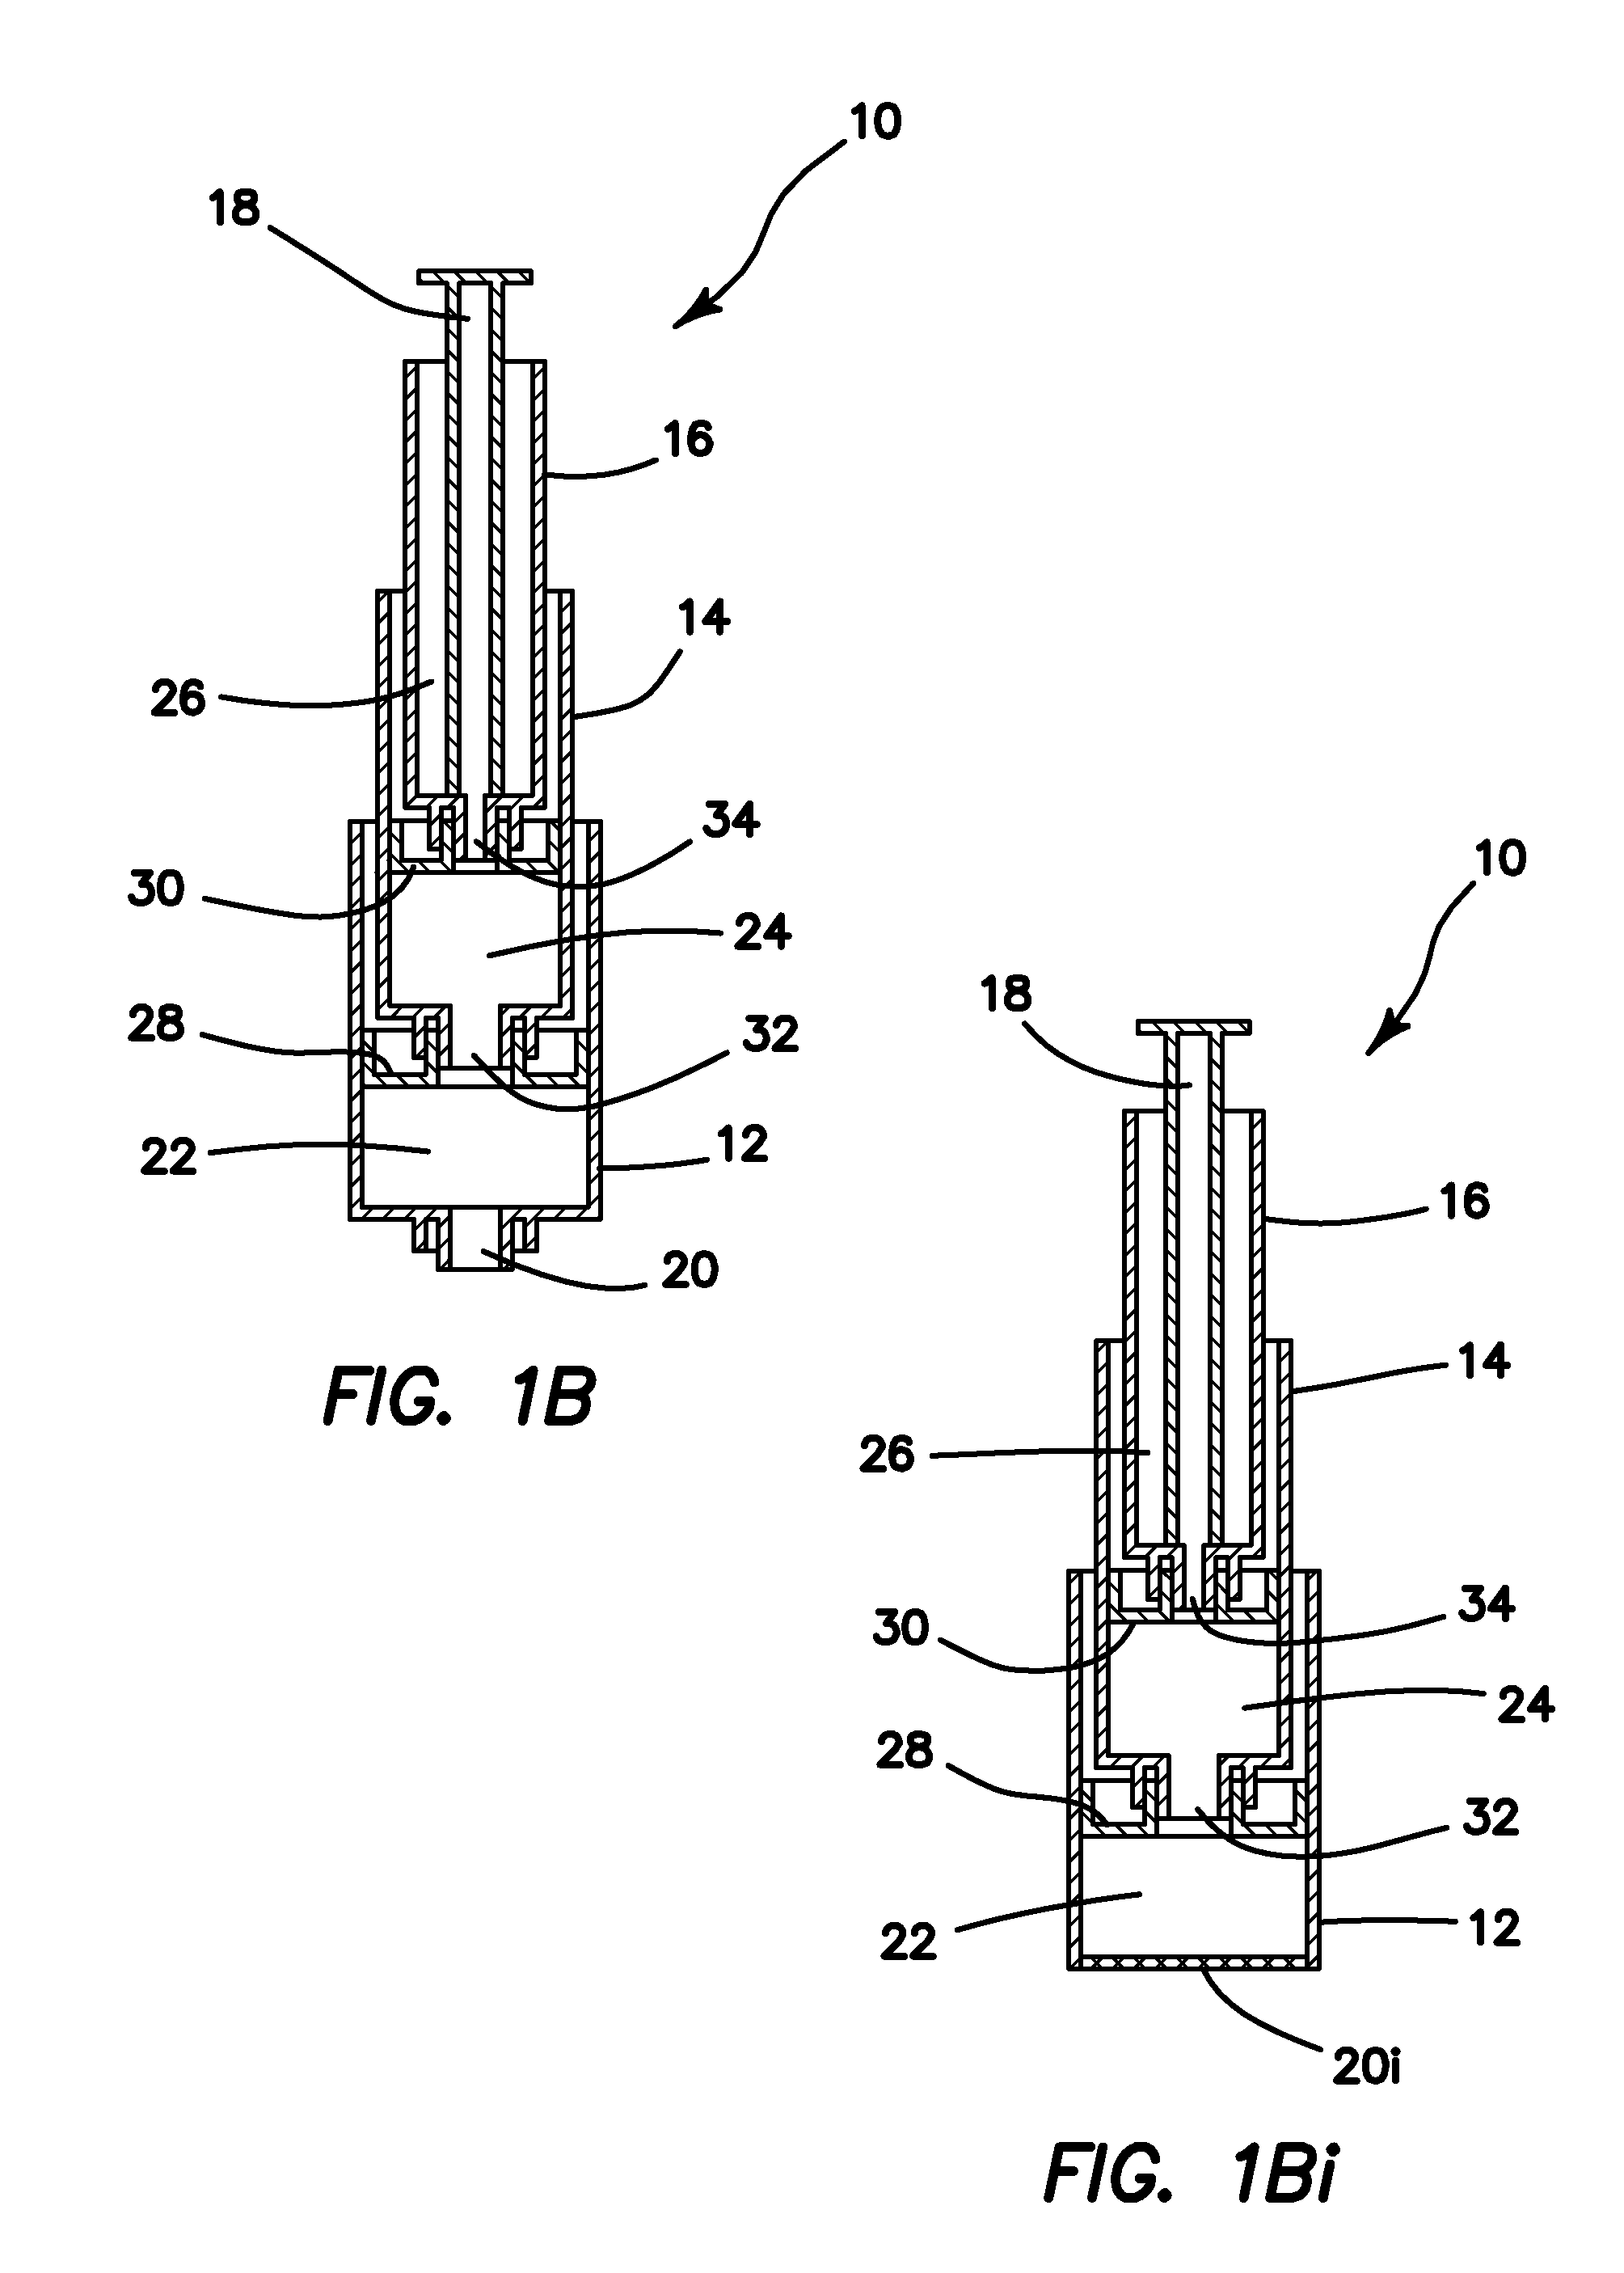 Method and Apparatus for Producing Platelet Rich Plasma